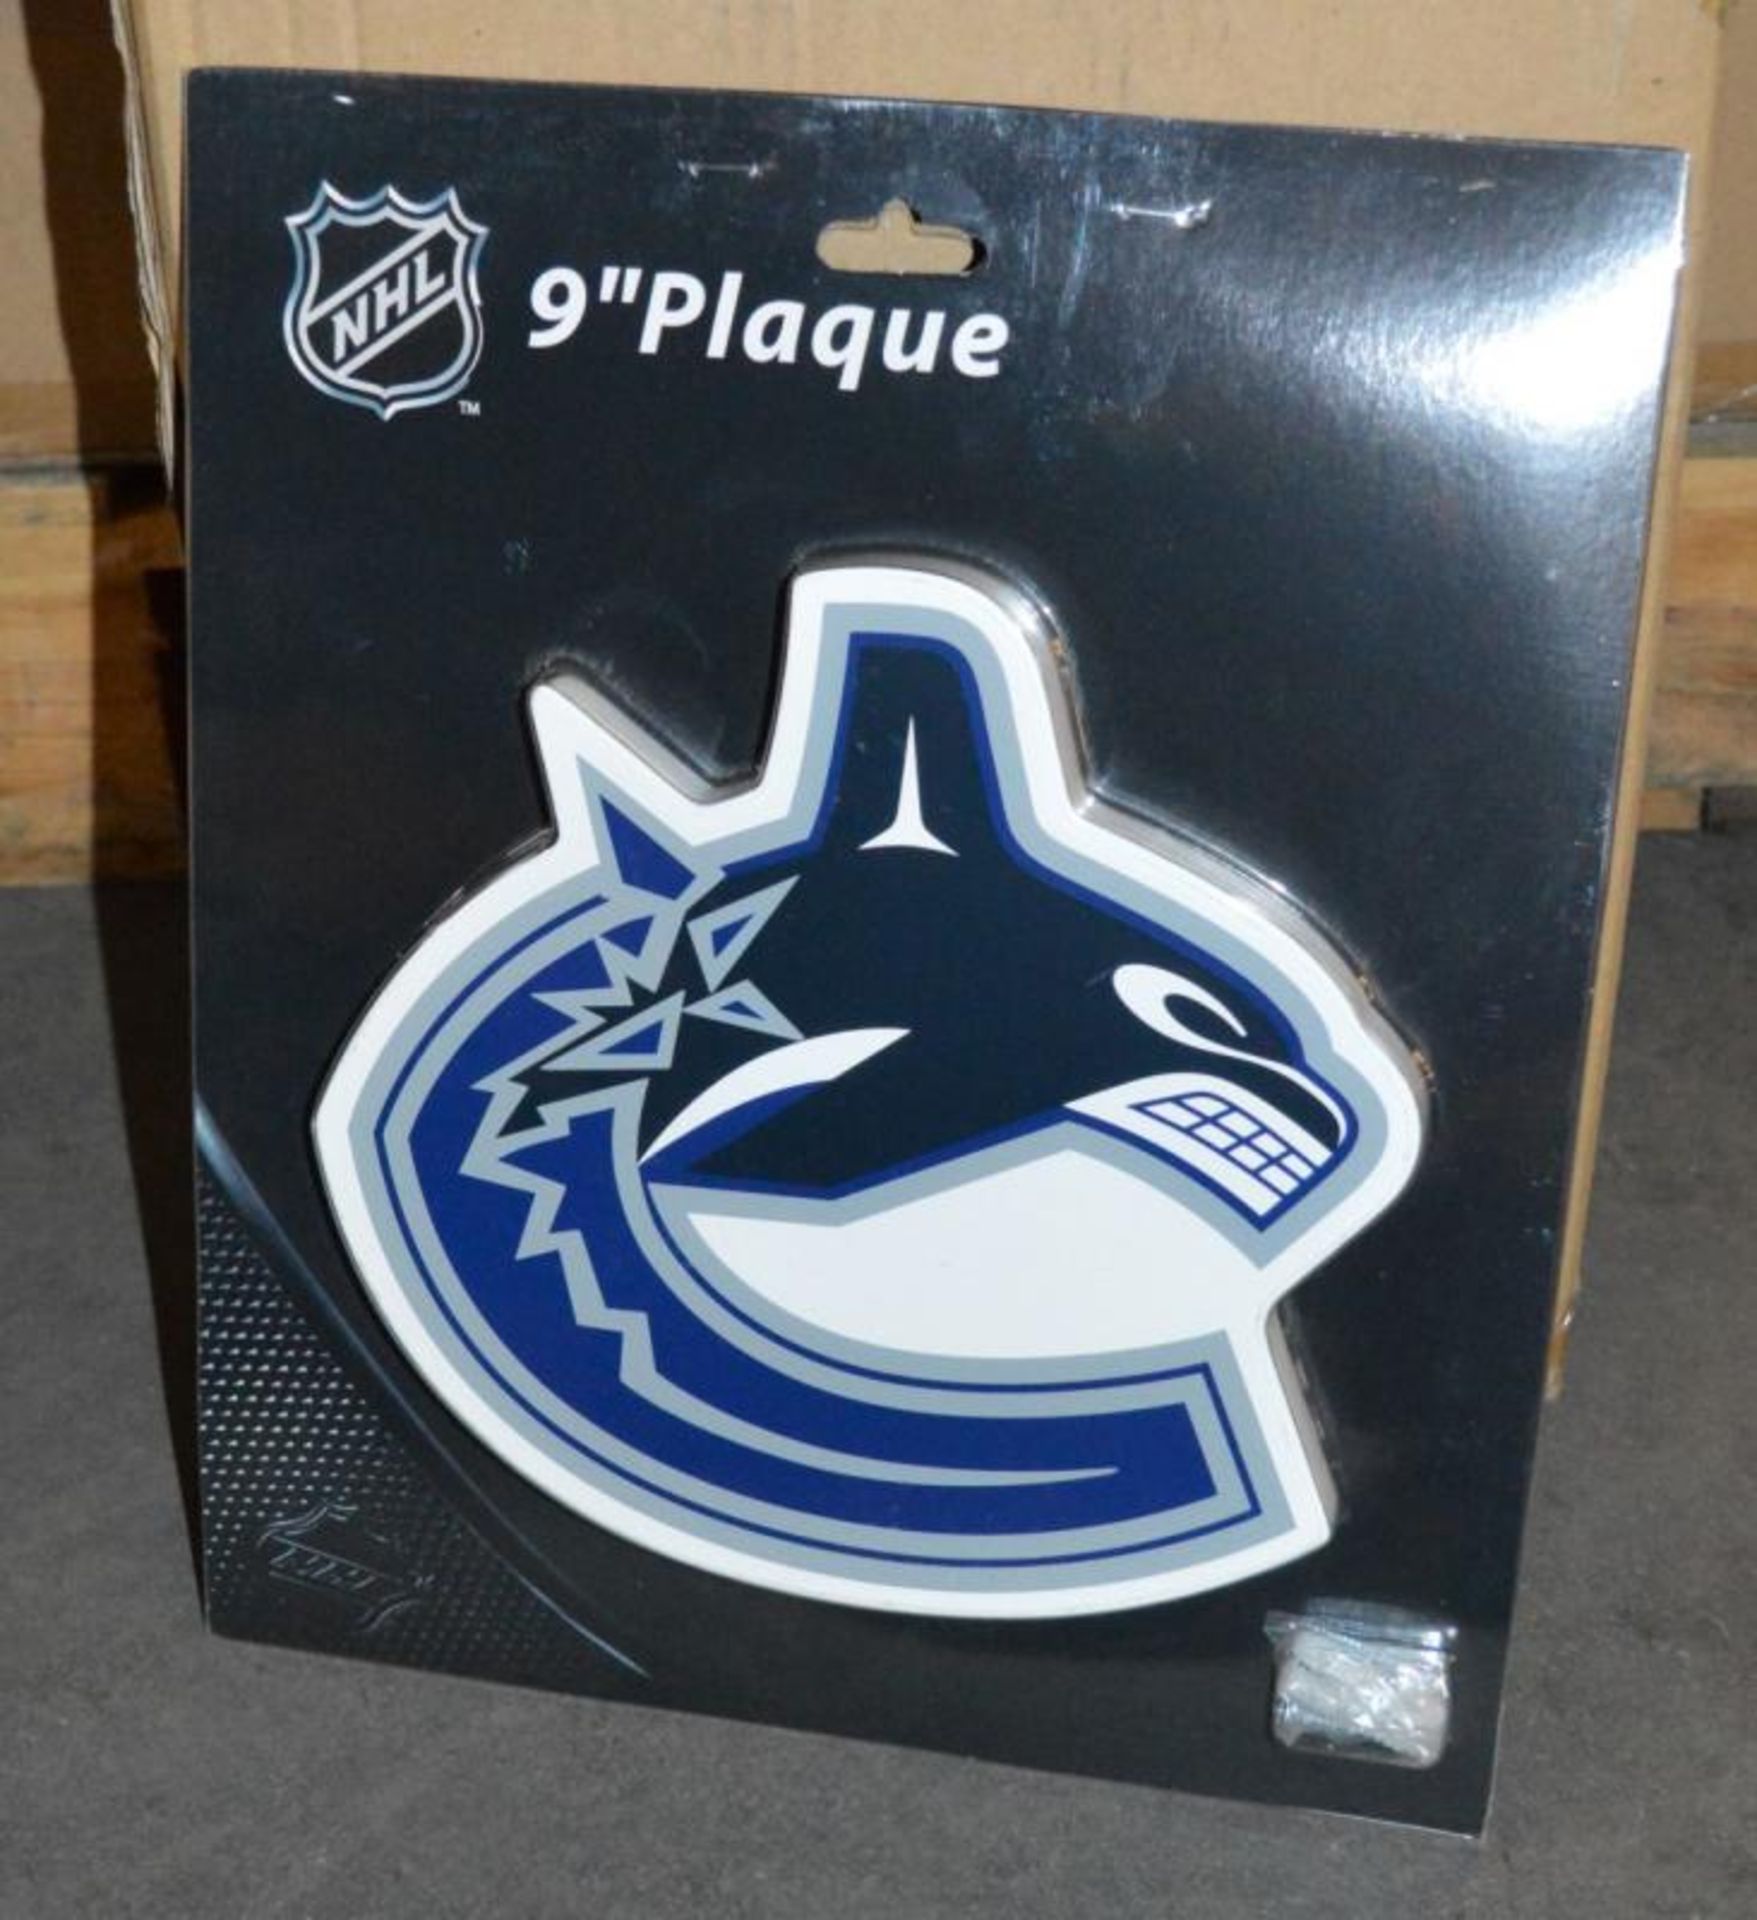 12 x 9" NHL Hockey Vancouver Canucks Plaques - New/Boxed - CL185 - Ref: DRT0753 - Location: Stoke-on - Image 4 of 7